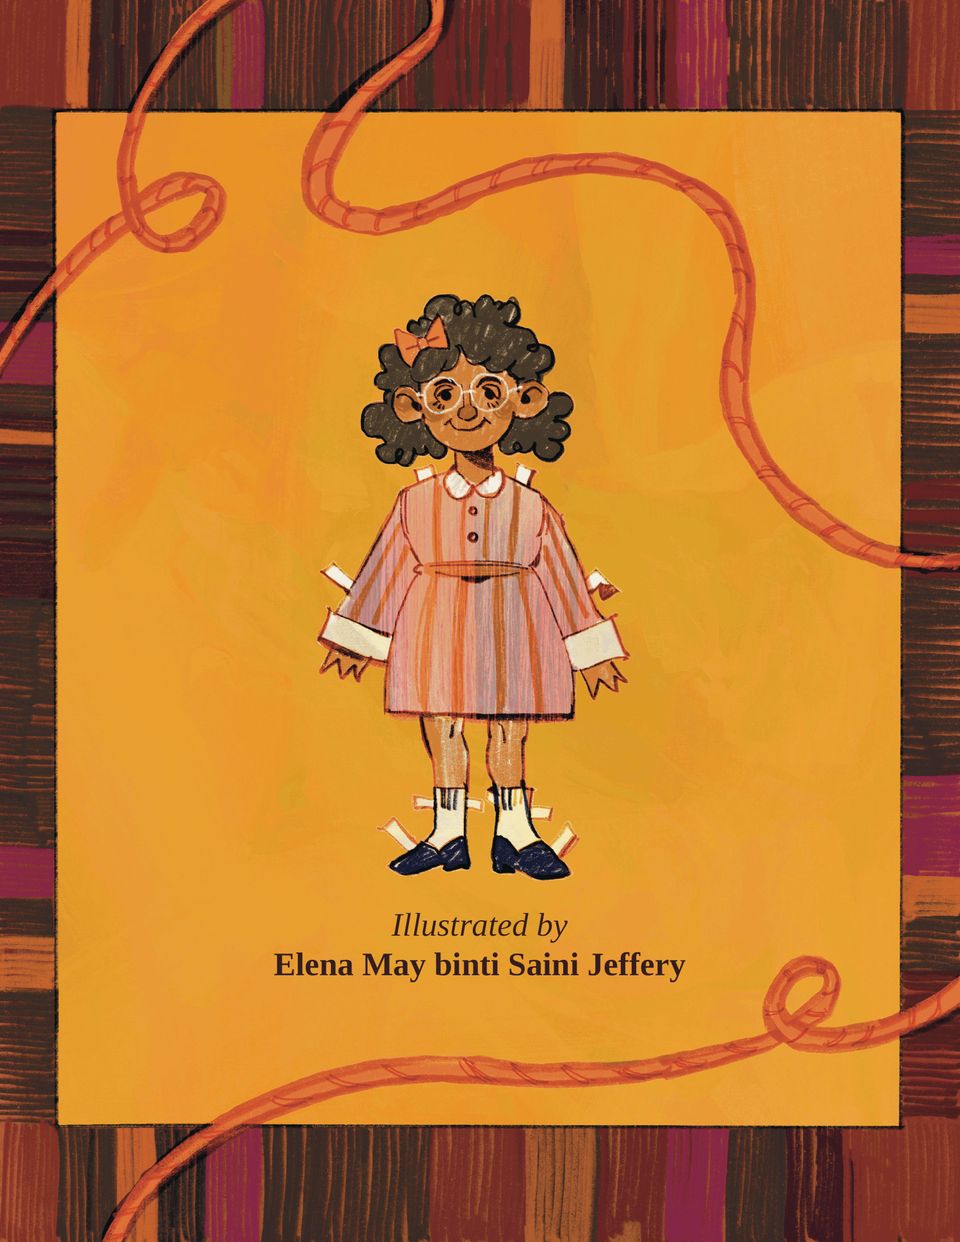 A paper doll version of a young Emma stands against a yellow background. Text reads: "Illustrated by Elena May binti Saini Jeffery."